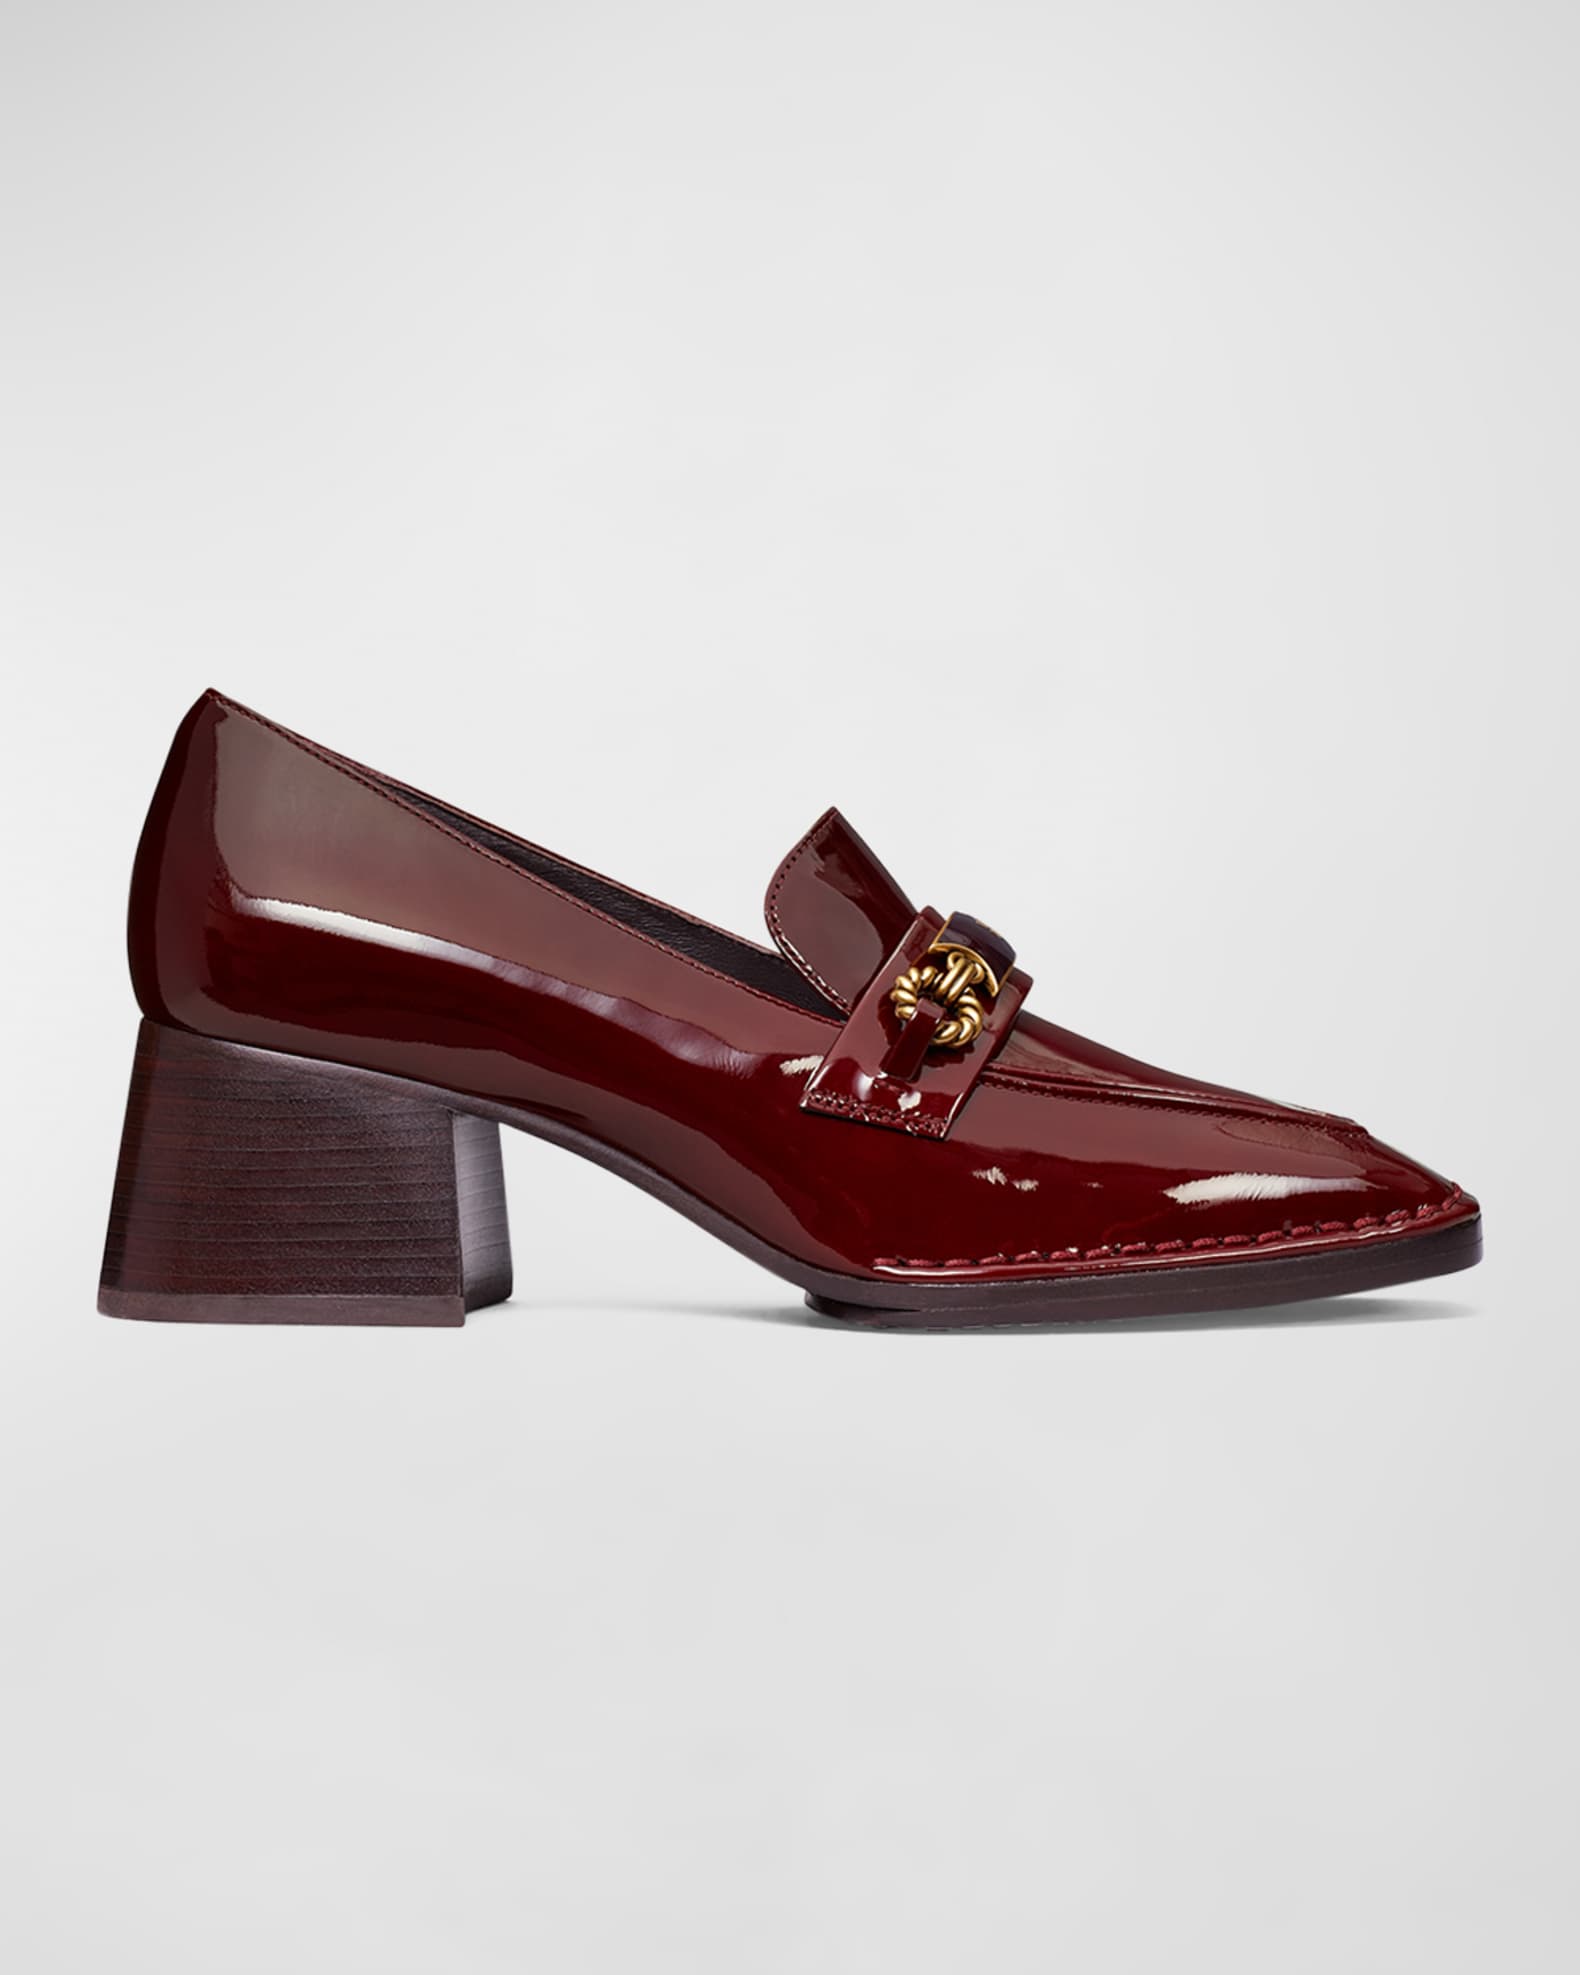 Tory Burch Perrine Leather Medallion Chain Loafers | Neiman Marcus